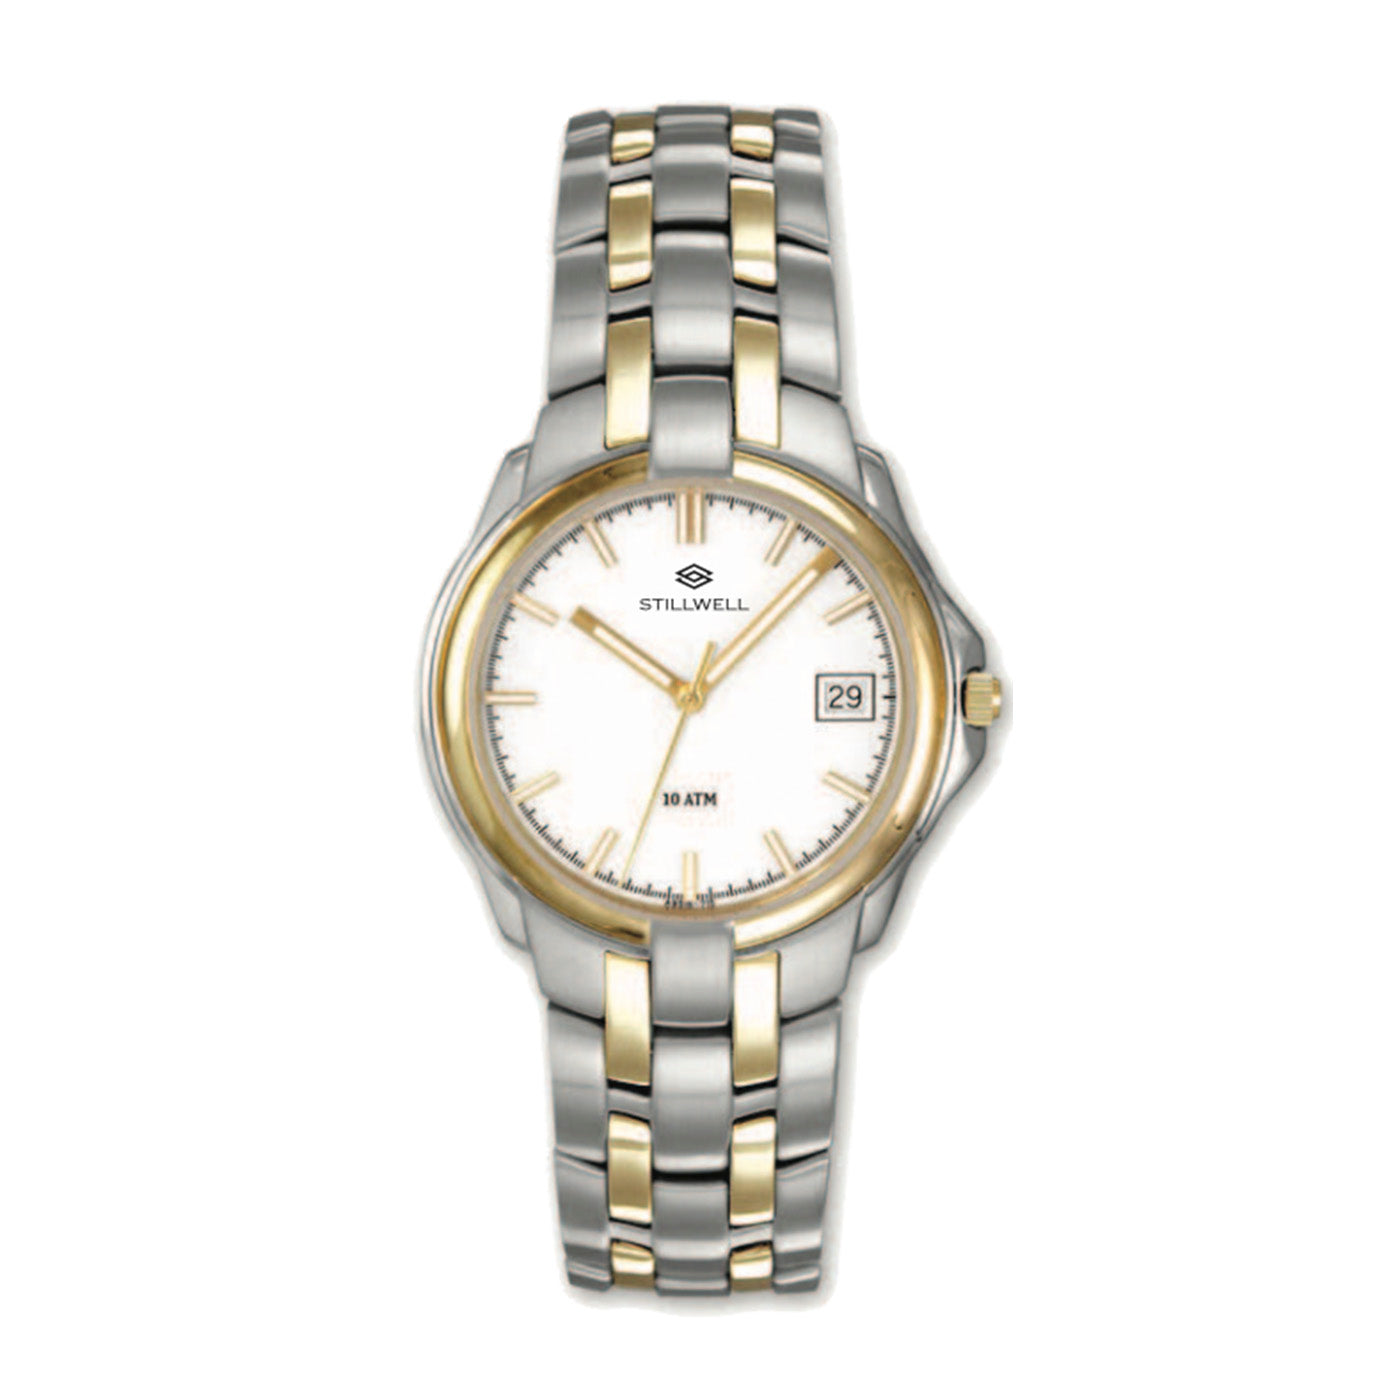 Stillwell Silver and Gold Watch